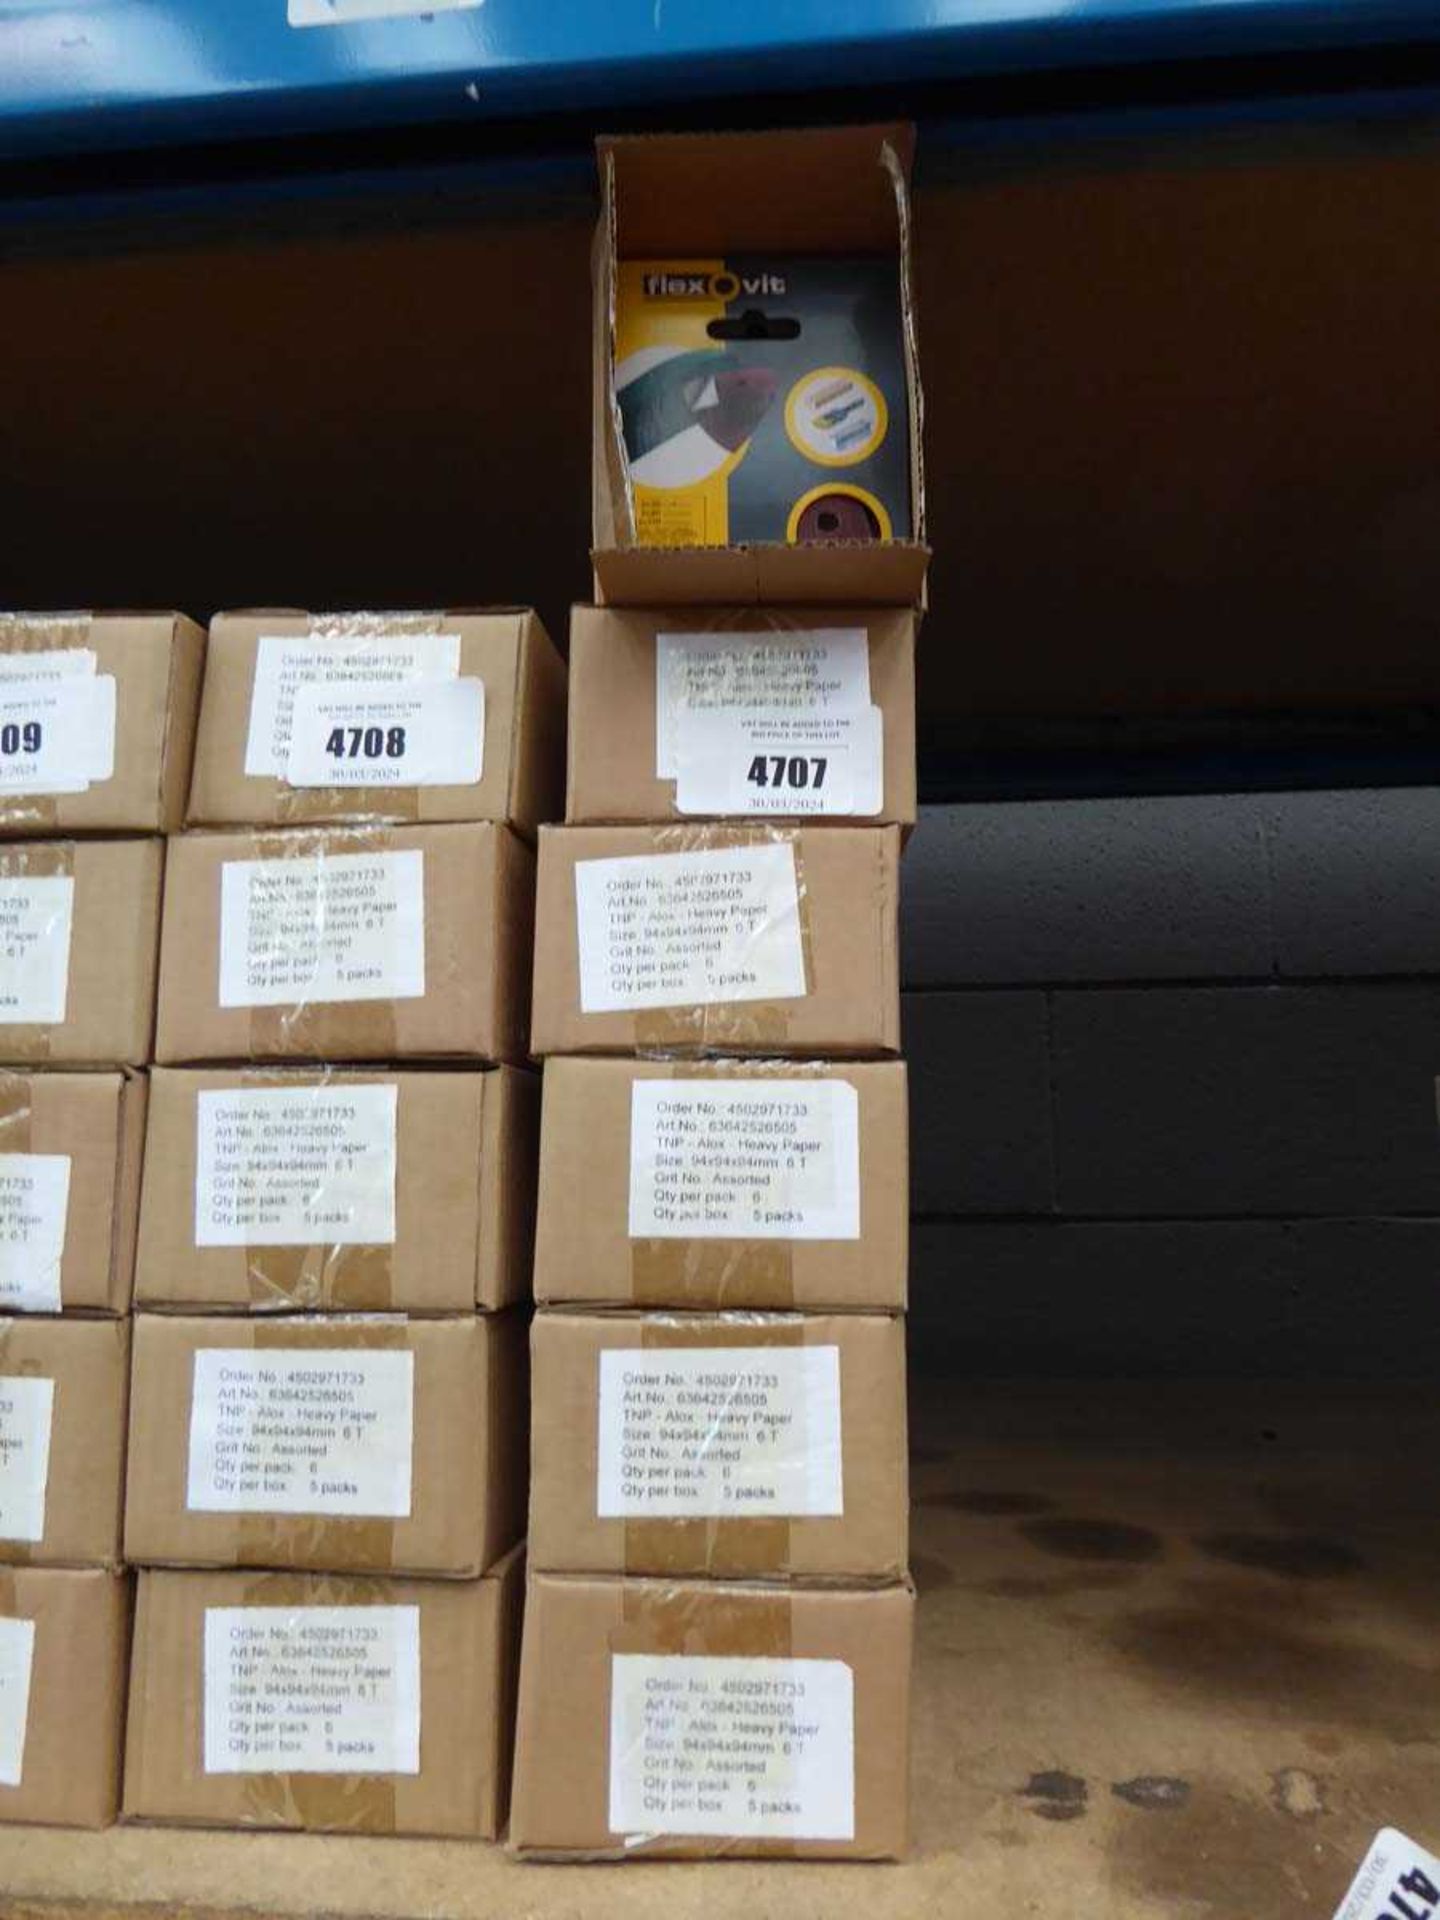 +VAT 5 boxes of assorted grit triangle sanding pads